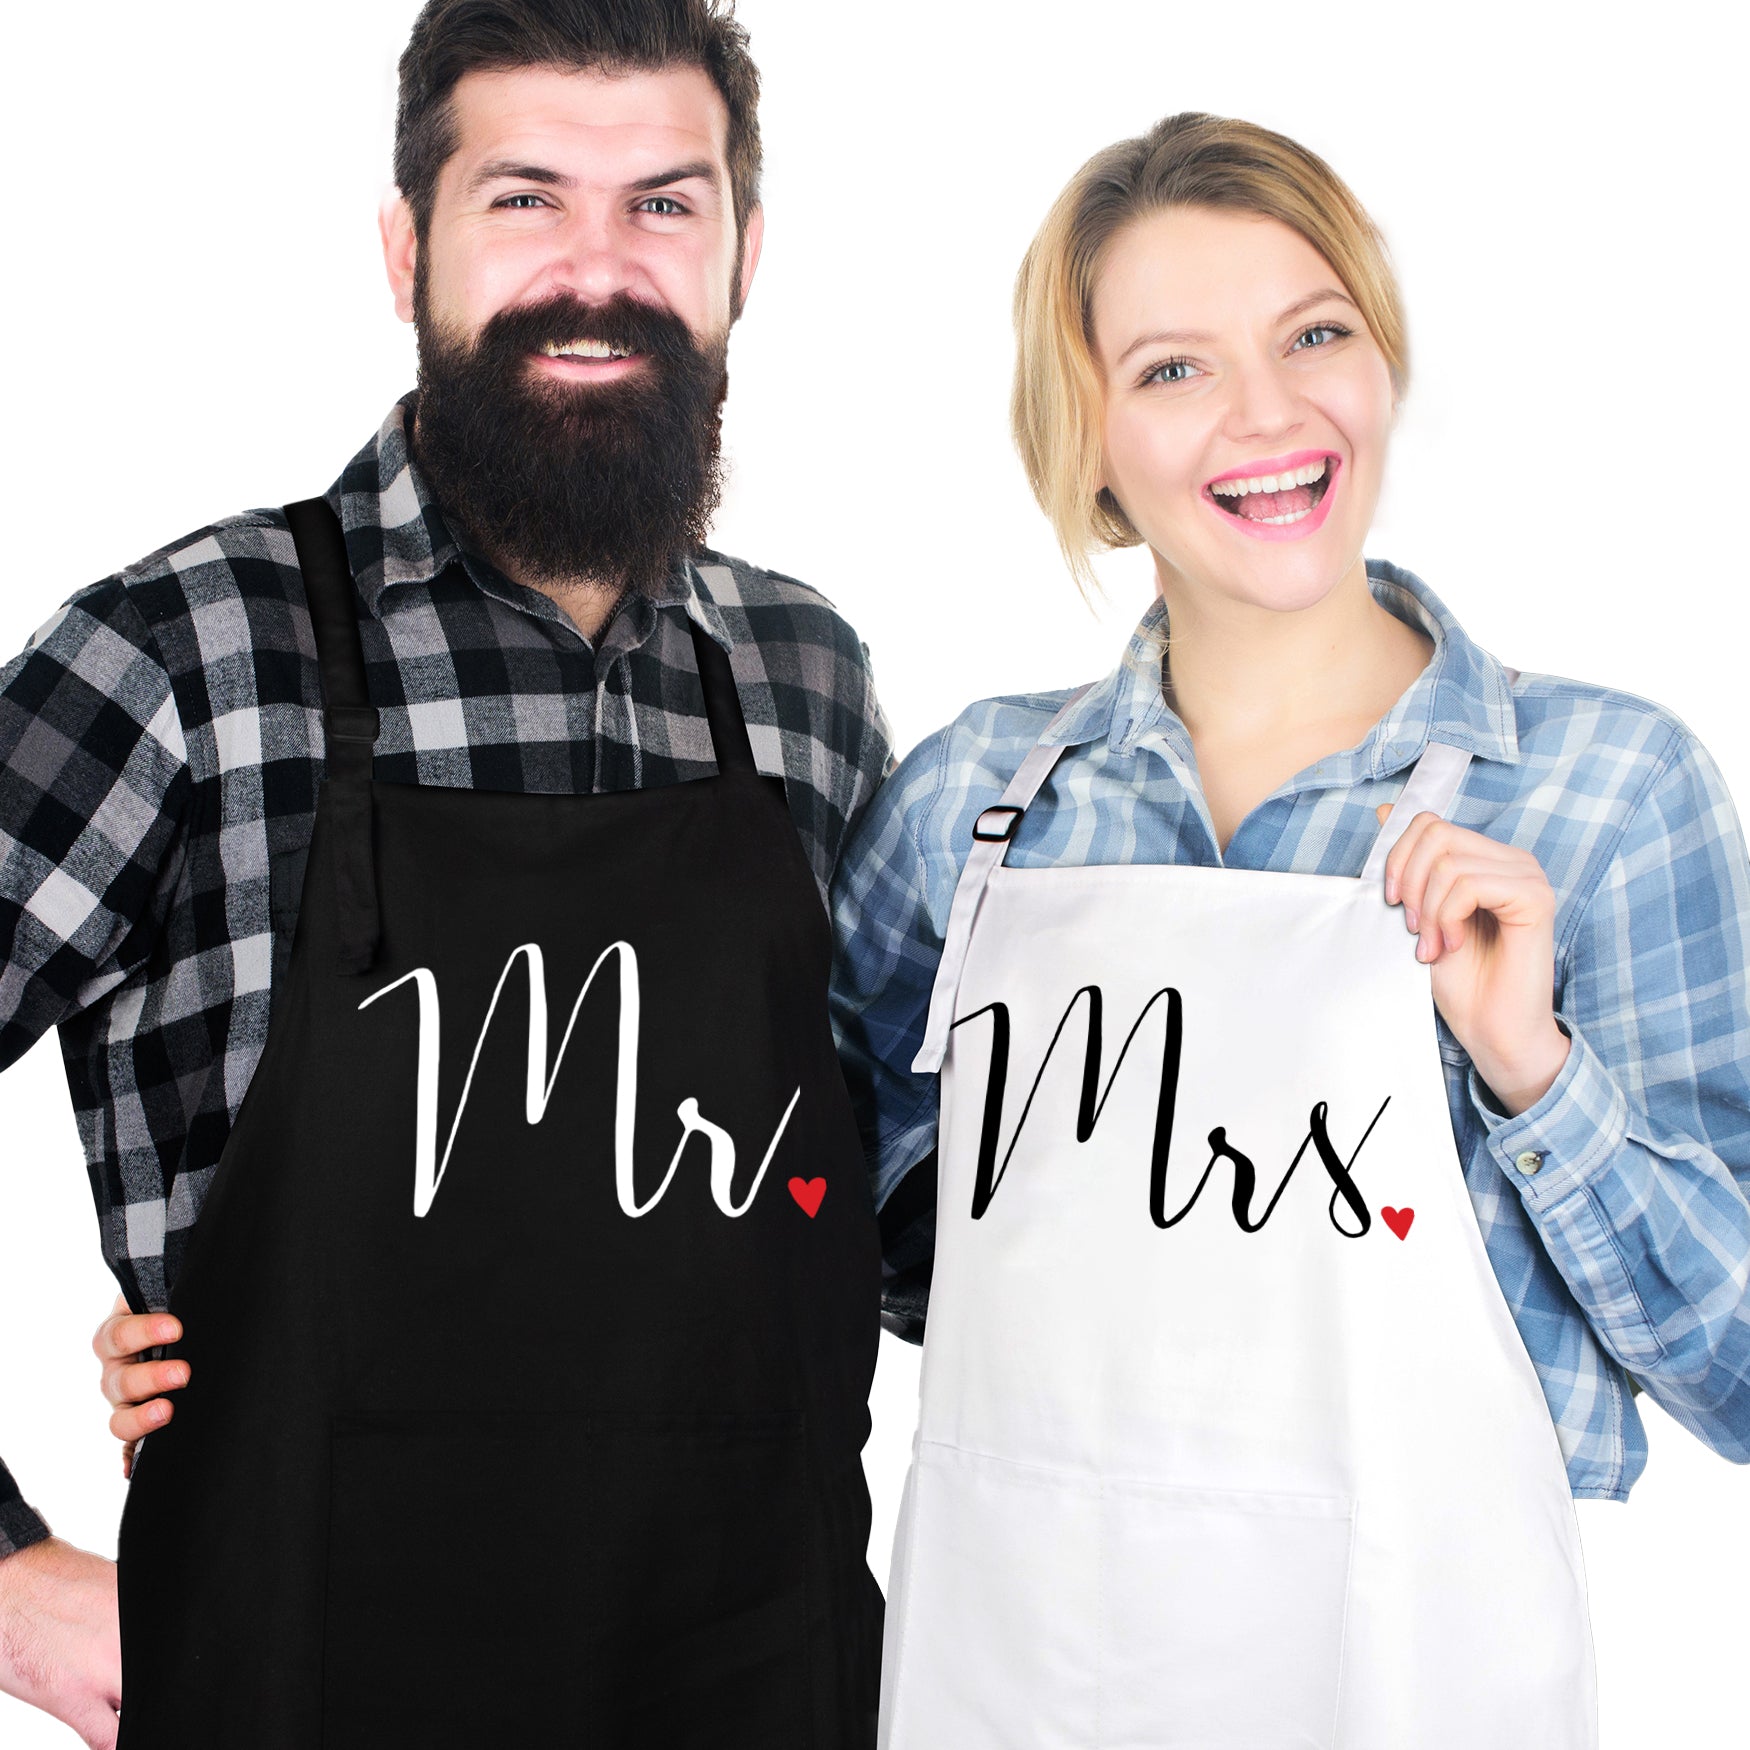 Mr & Mrs Apron Set - His and Hers Couples Aprons